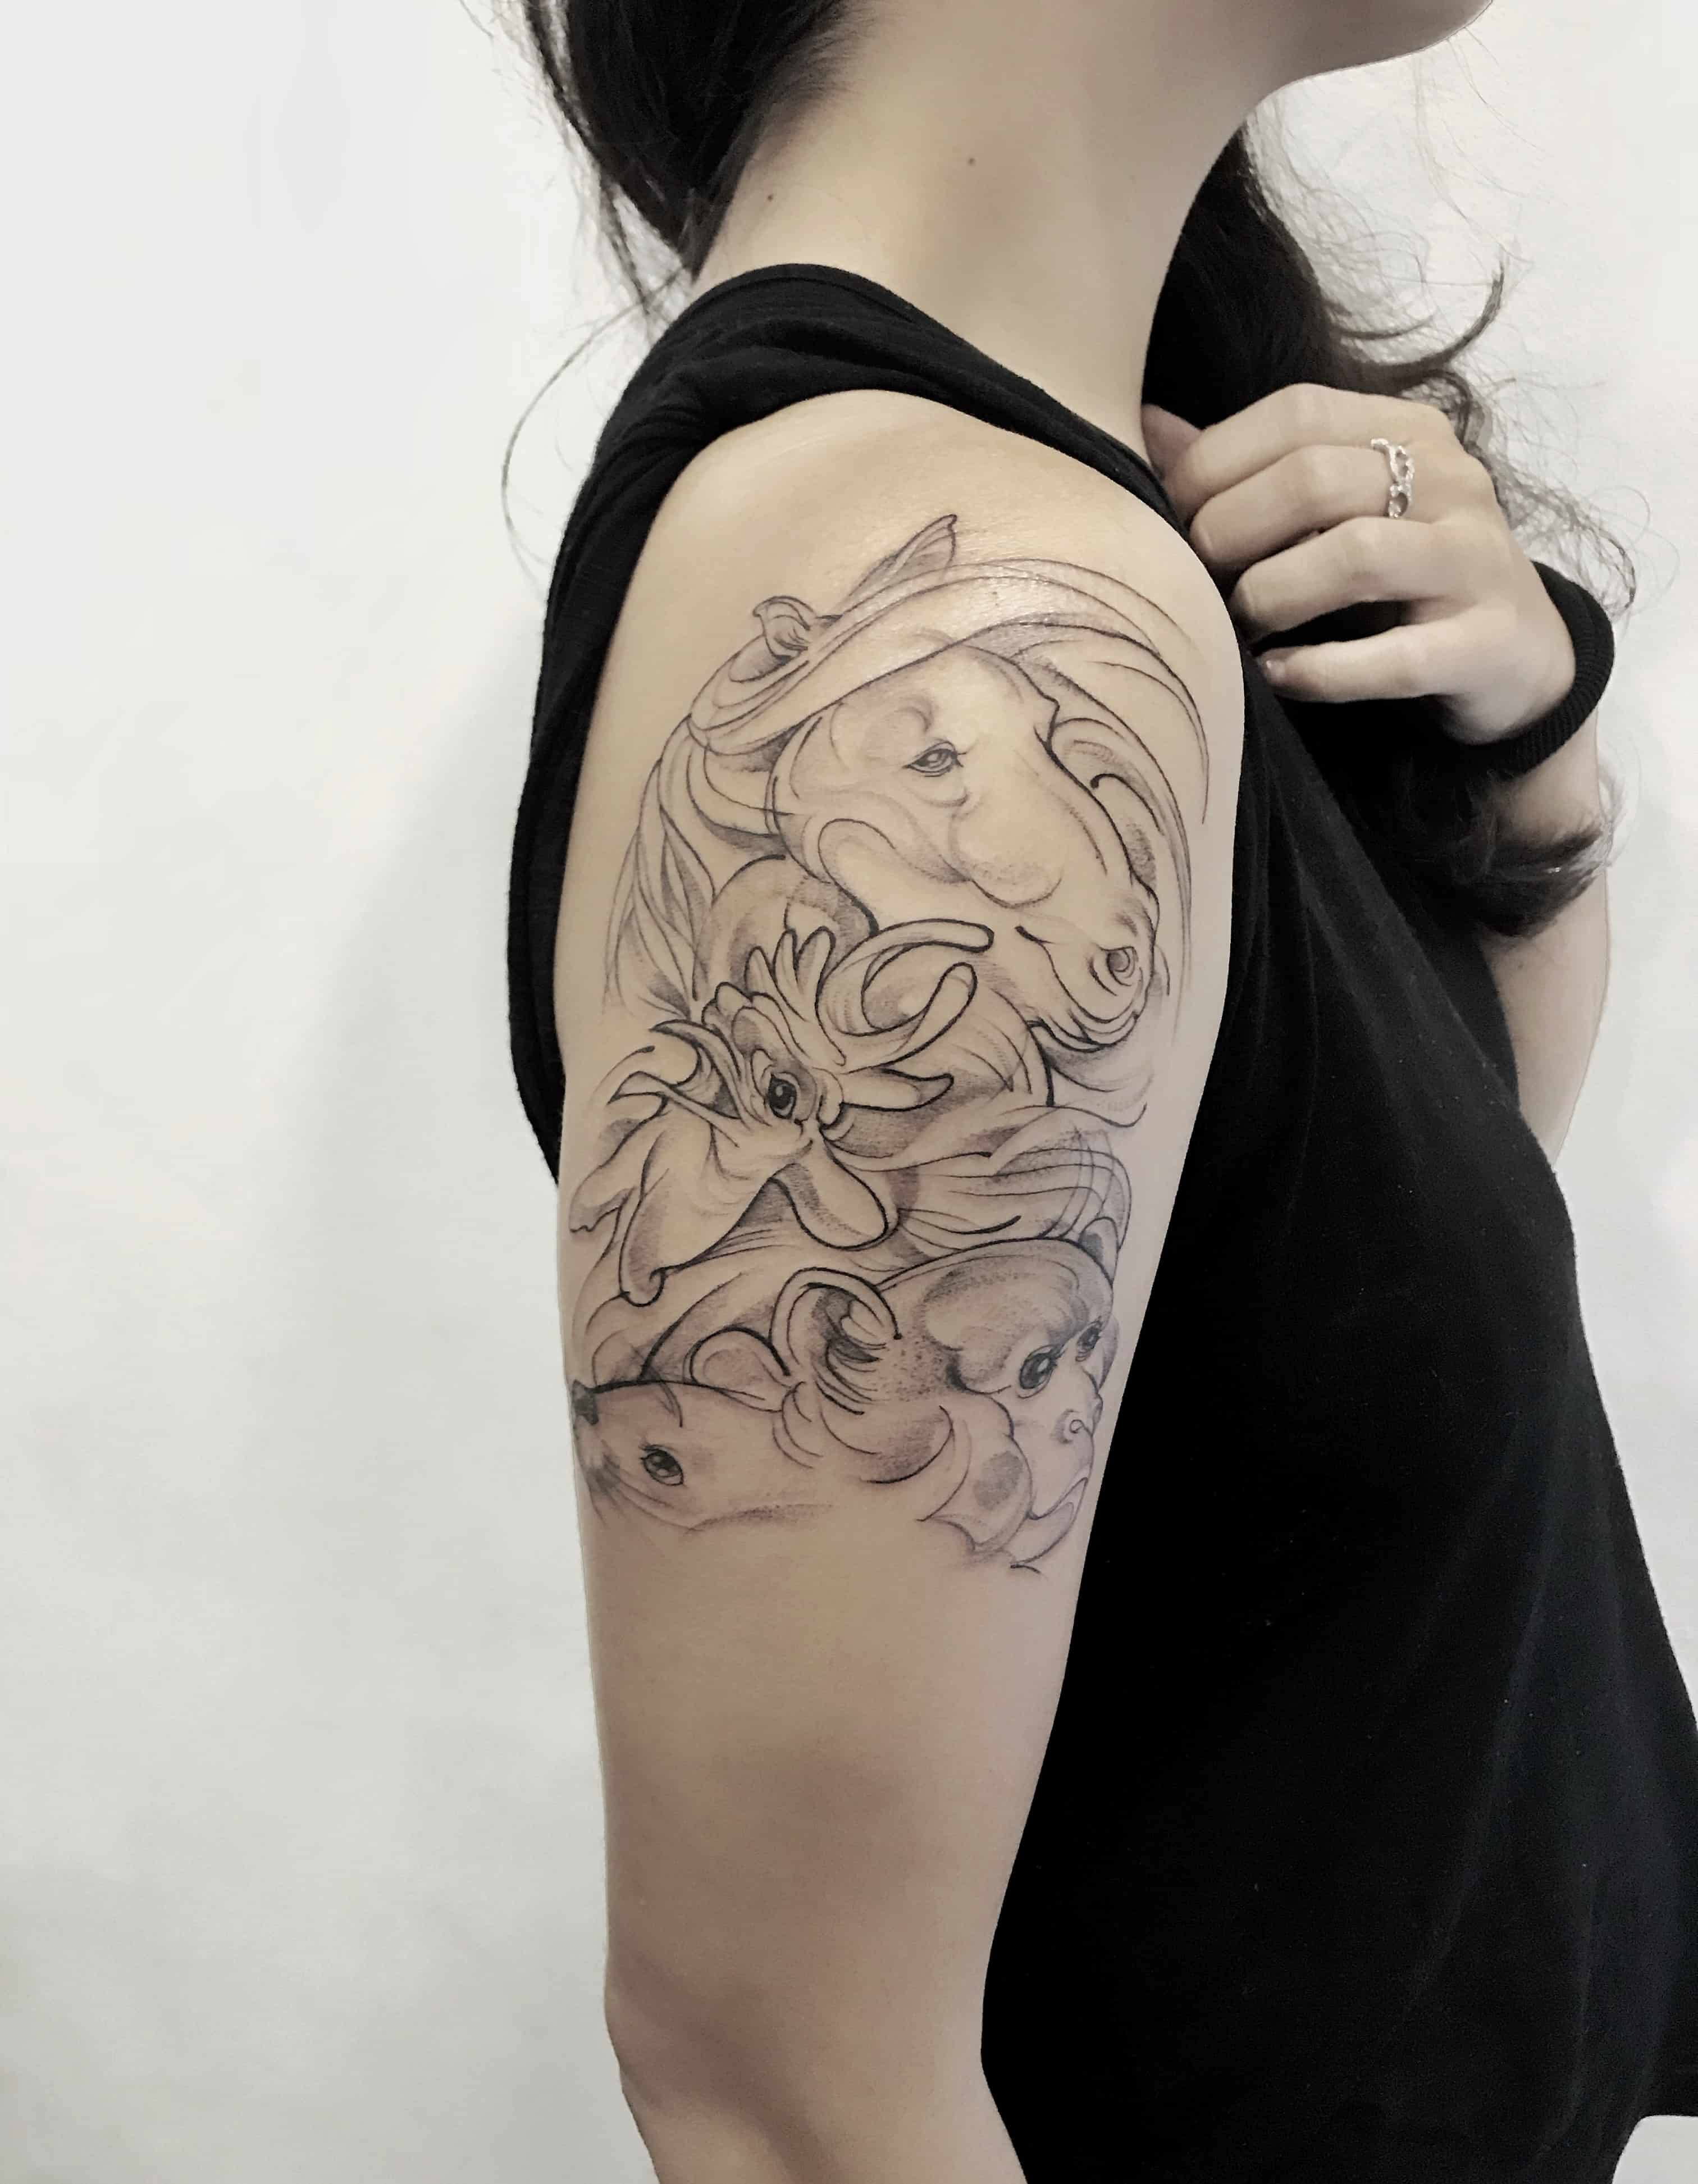 Meet Fleecircus, One Of The Up And Rising Tattoo Artists In Singapore